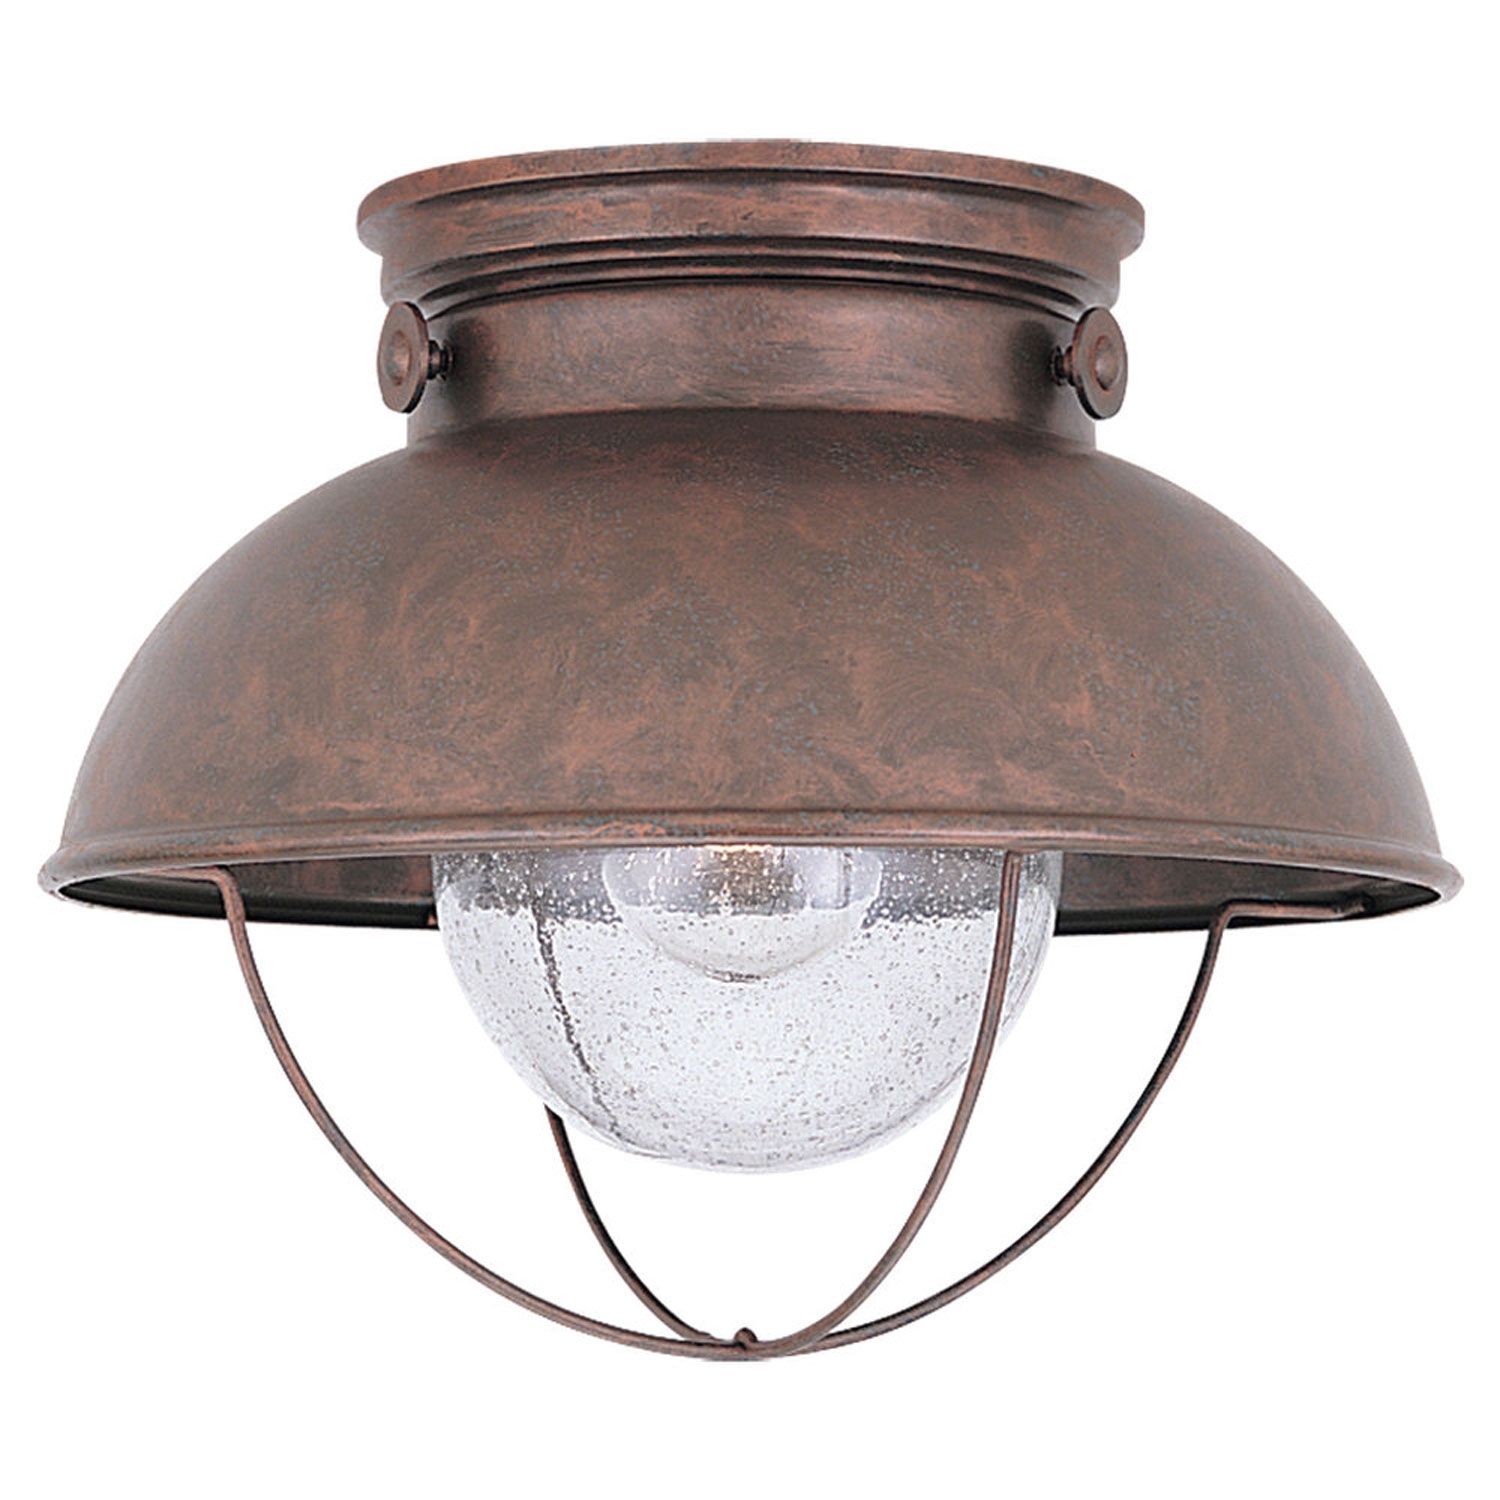 Sea Gull Lighting Sebring Weathered Copper Outdoor Ceiling Light On Sale For Outdoor Ceiling Lighting Fixtures (View 2 of 15)